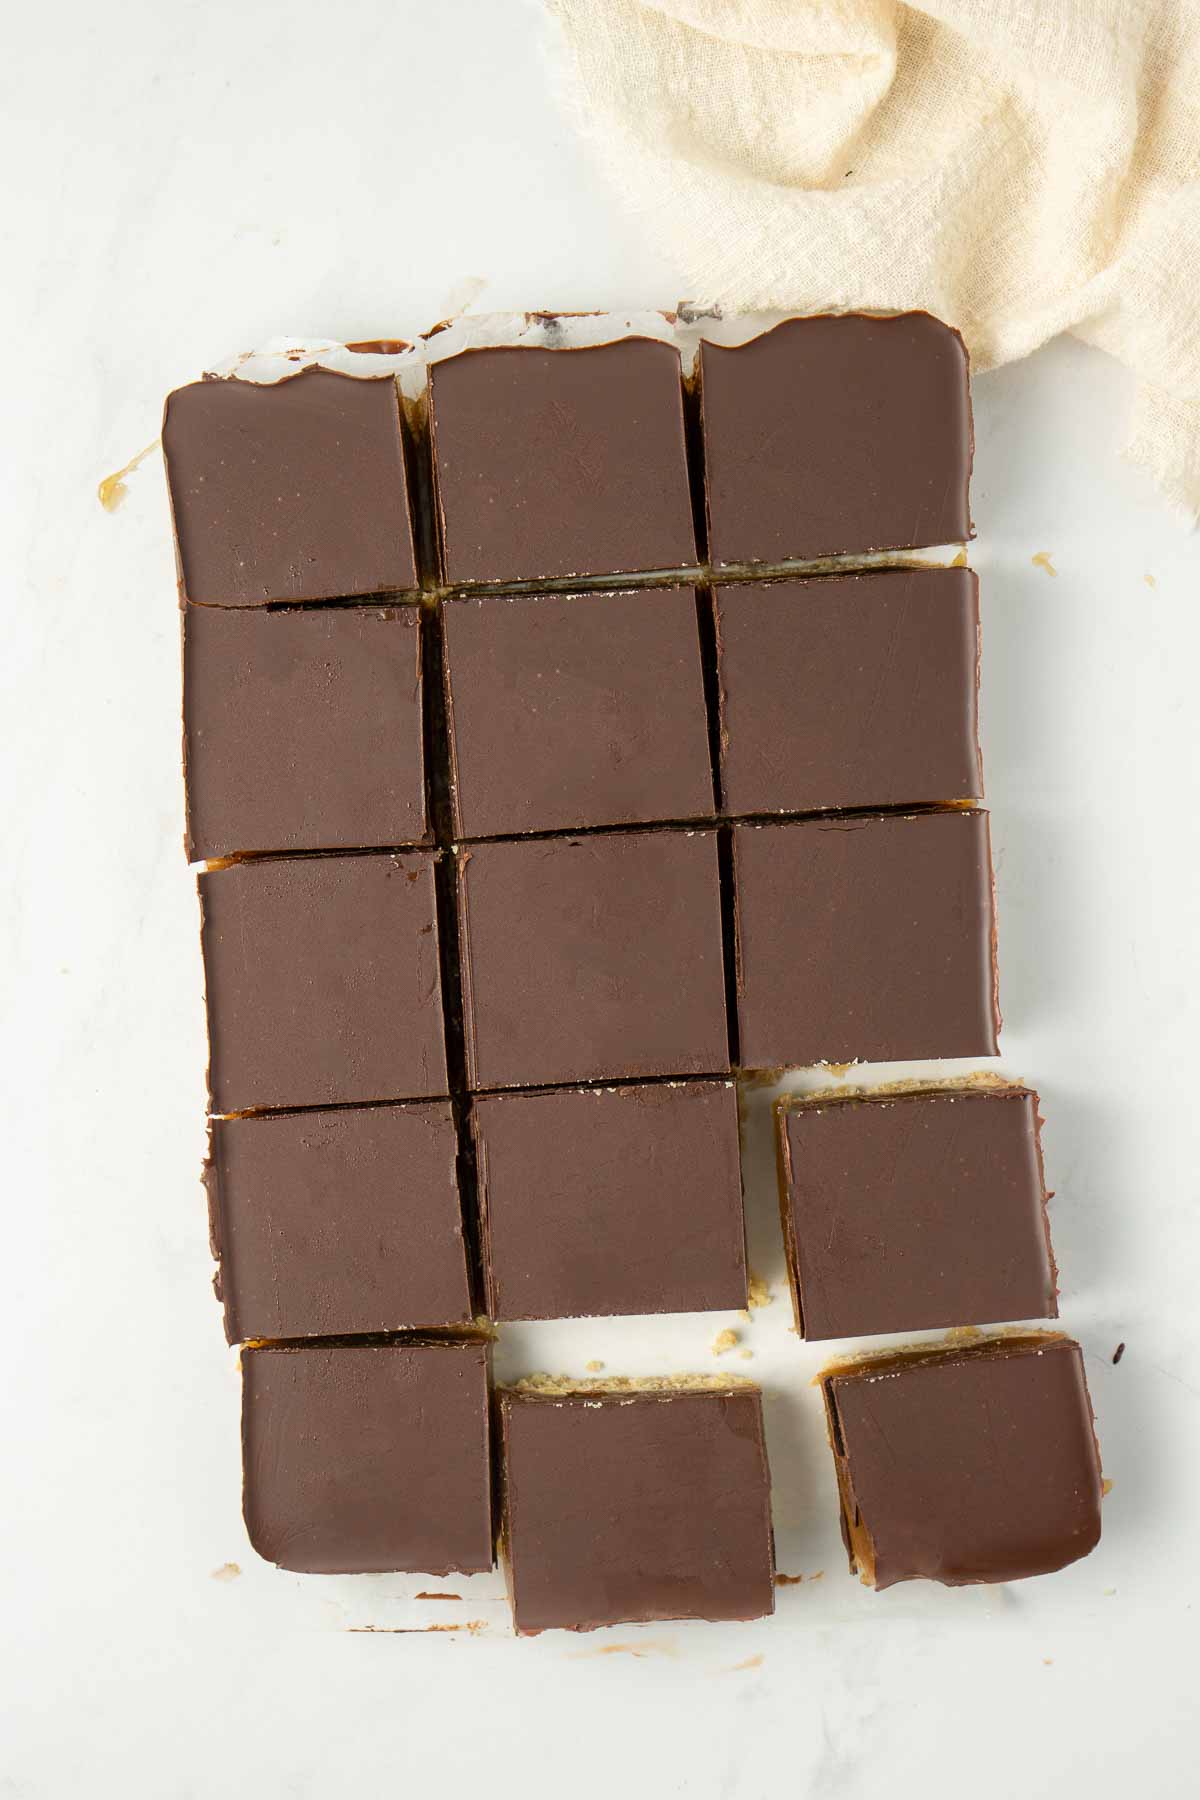 Caramel slice or vegan millionaire's shortbread cut into squares from above.